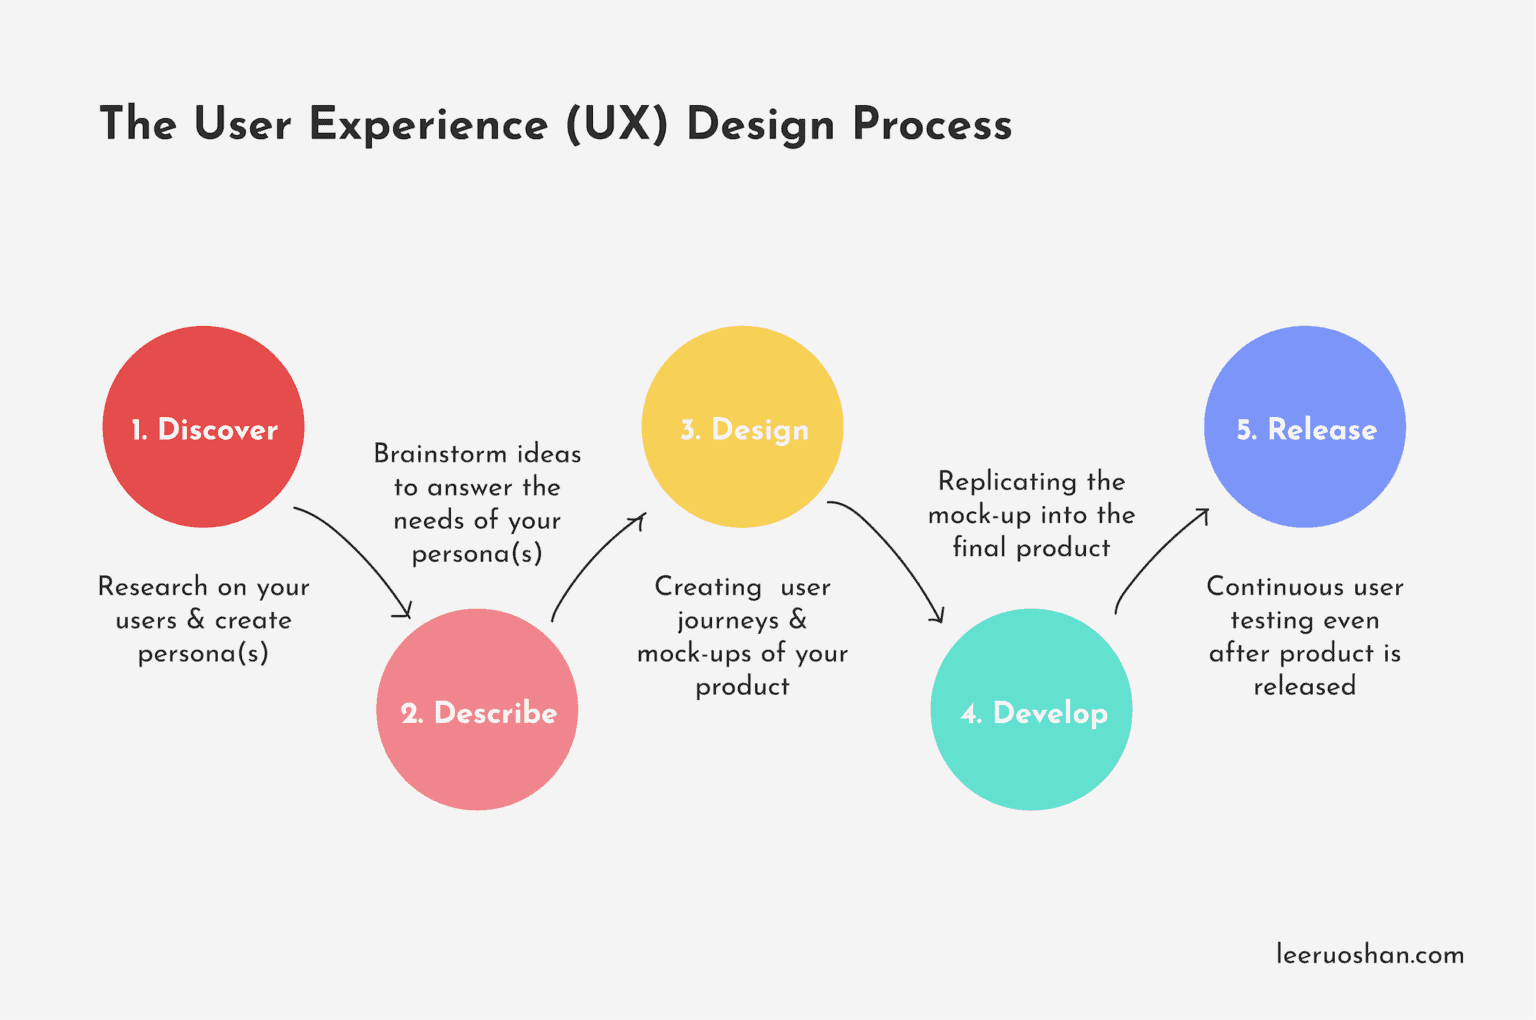 The Fundamentals of User Experience (UX) Design Shan